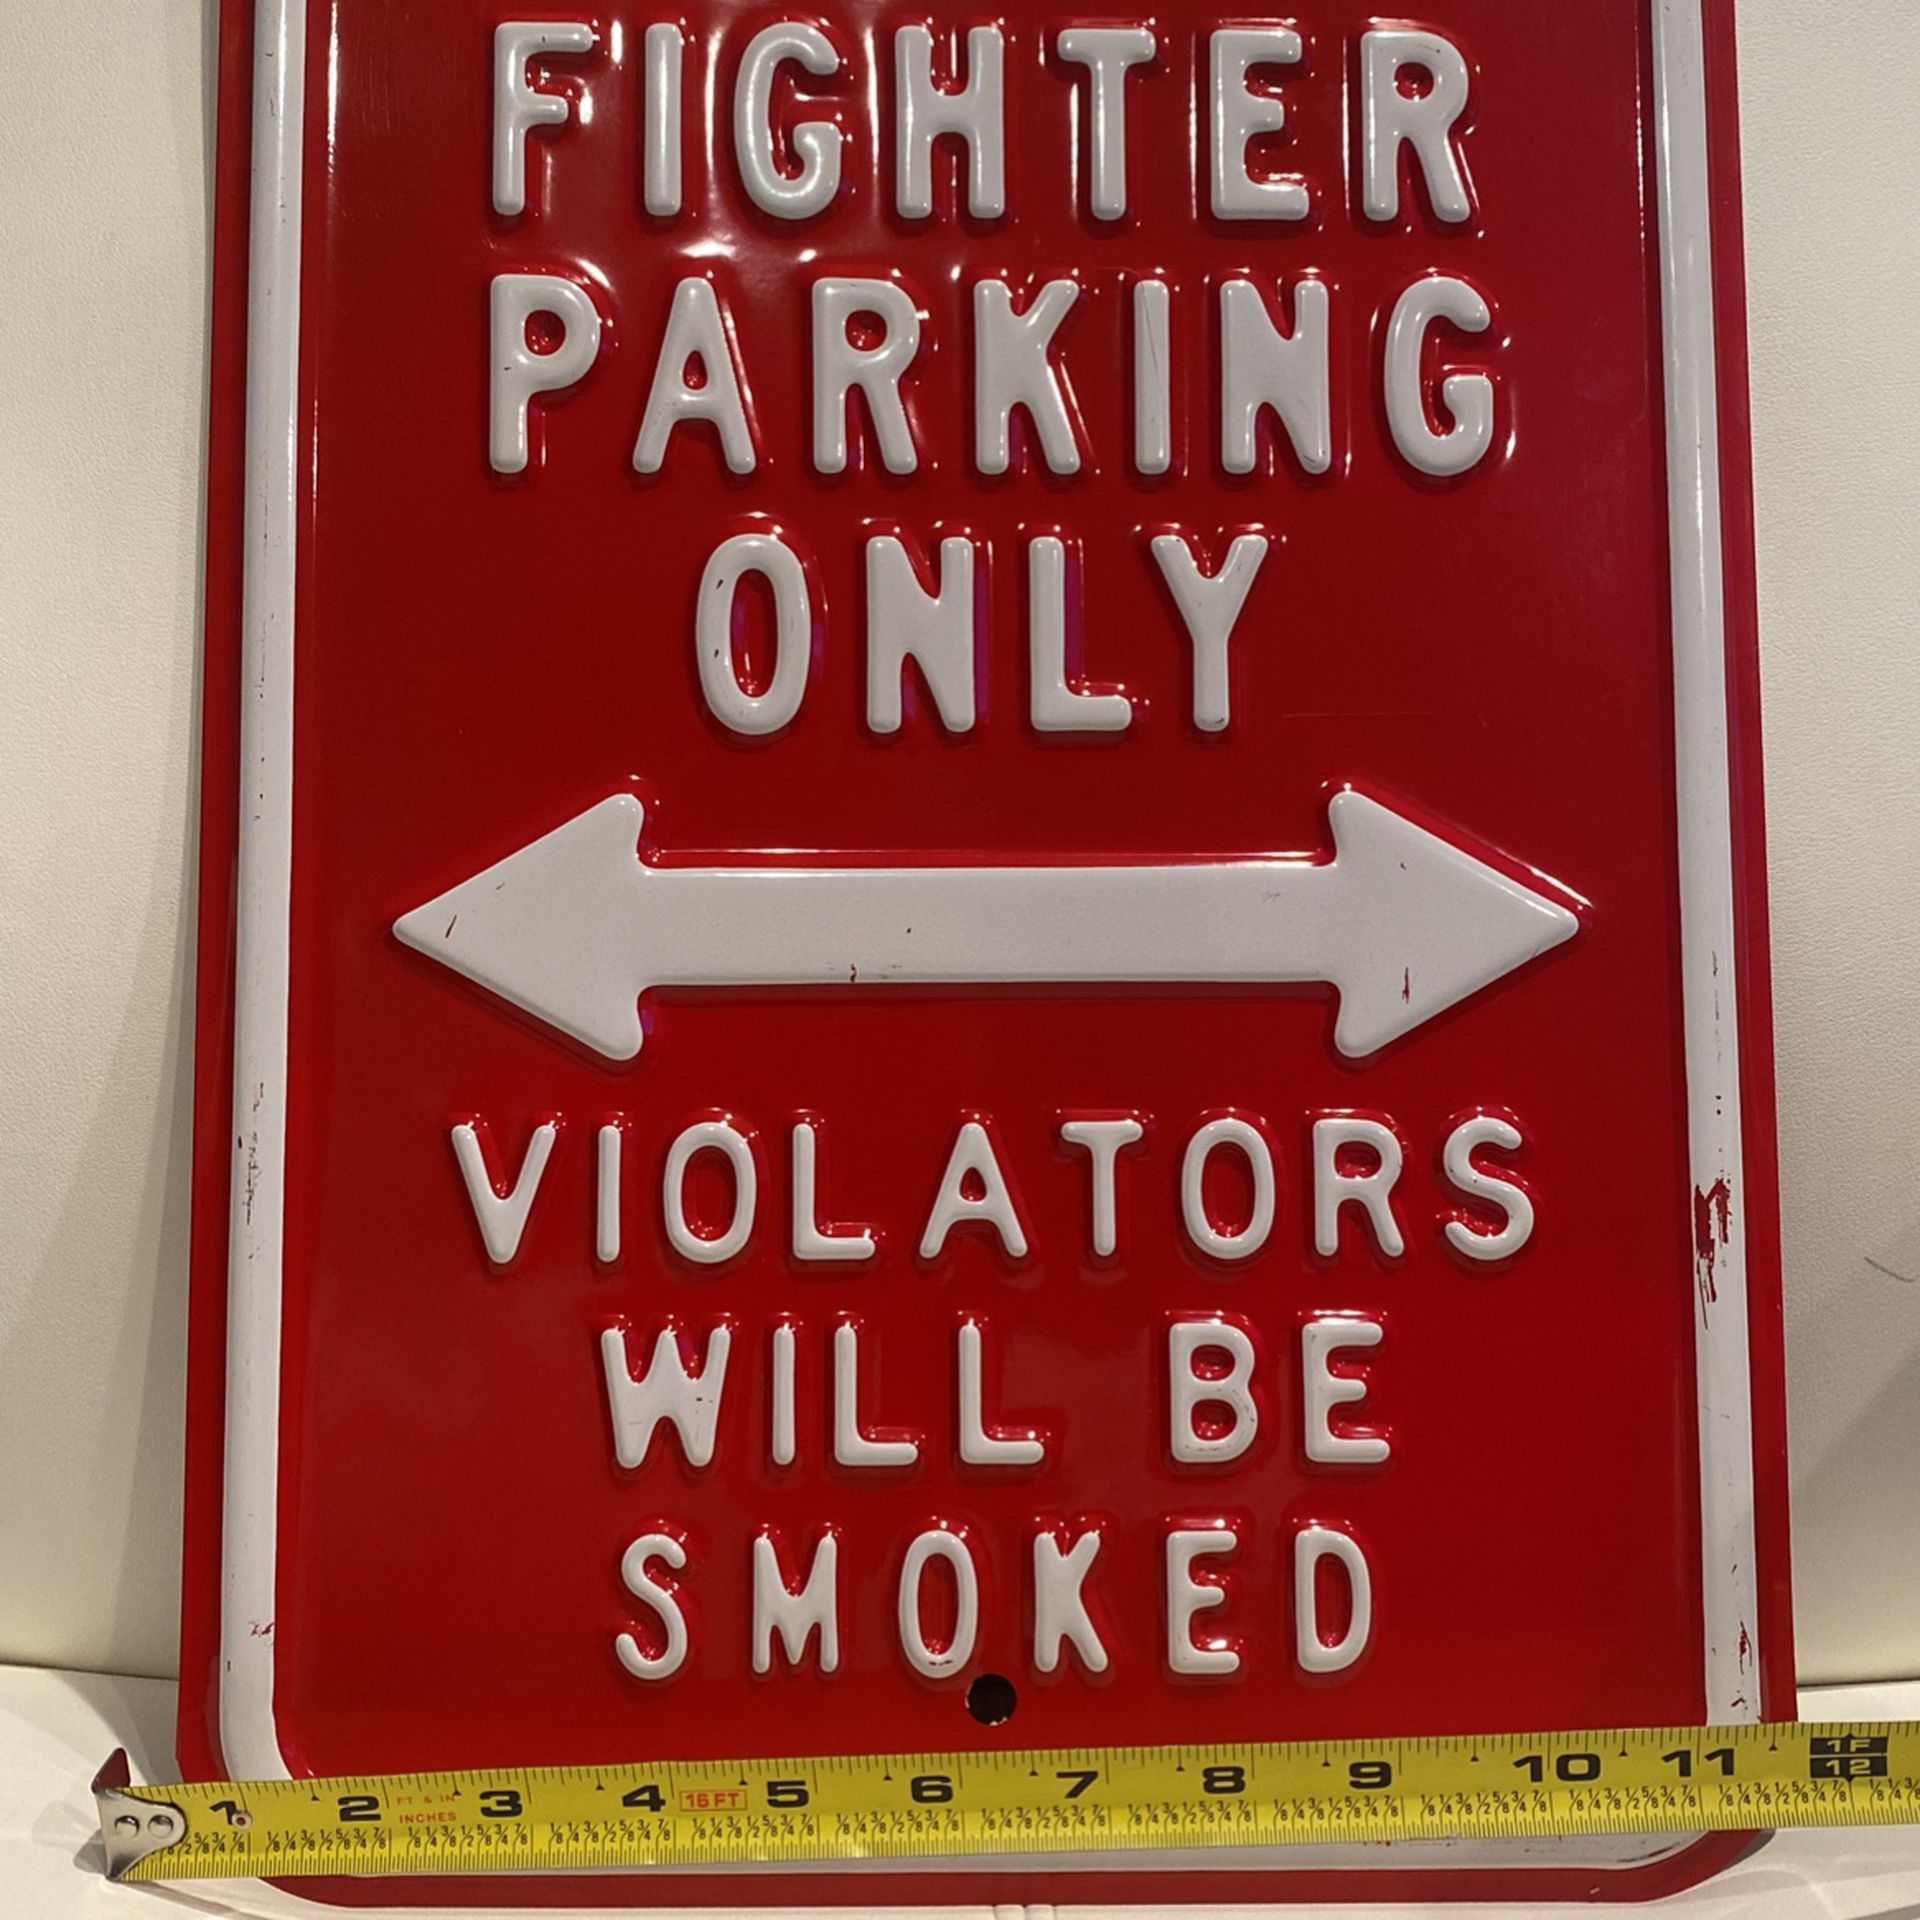 FIRE FIGHTER PARKING ONLY HEAVY METAL SIGN